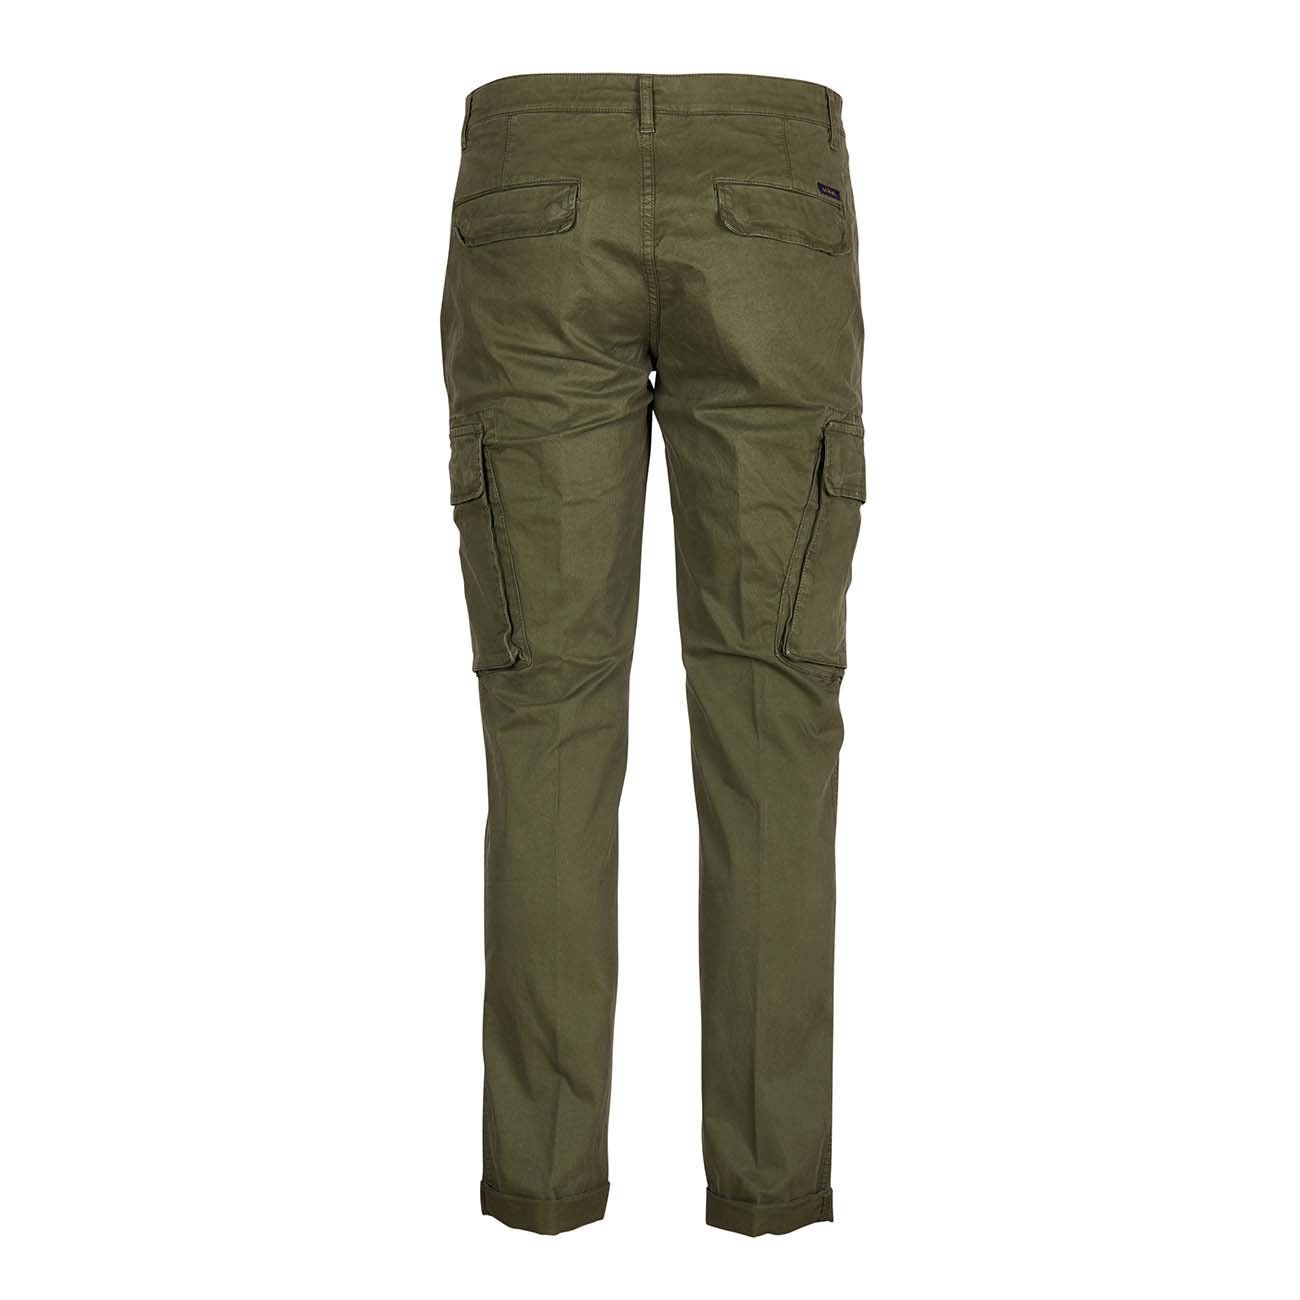 40WEFT SLIM FIT CARGO PANTS Man Military